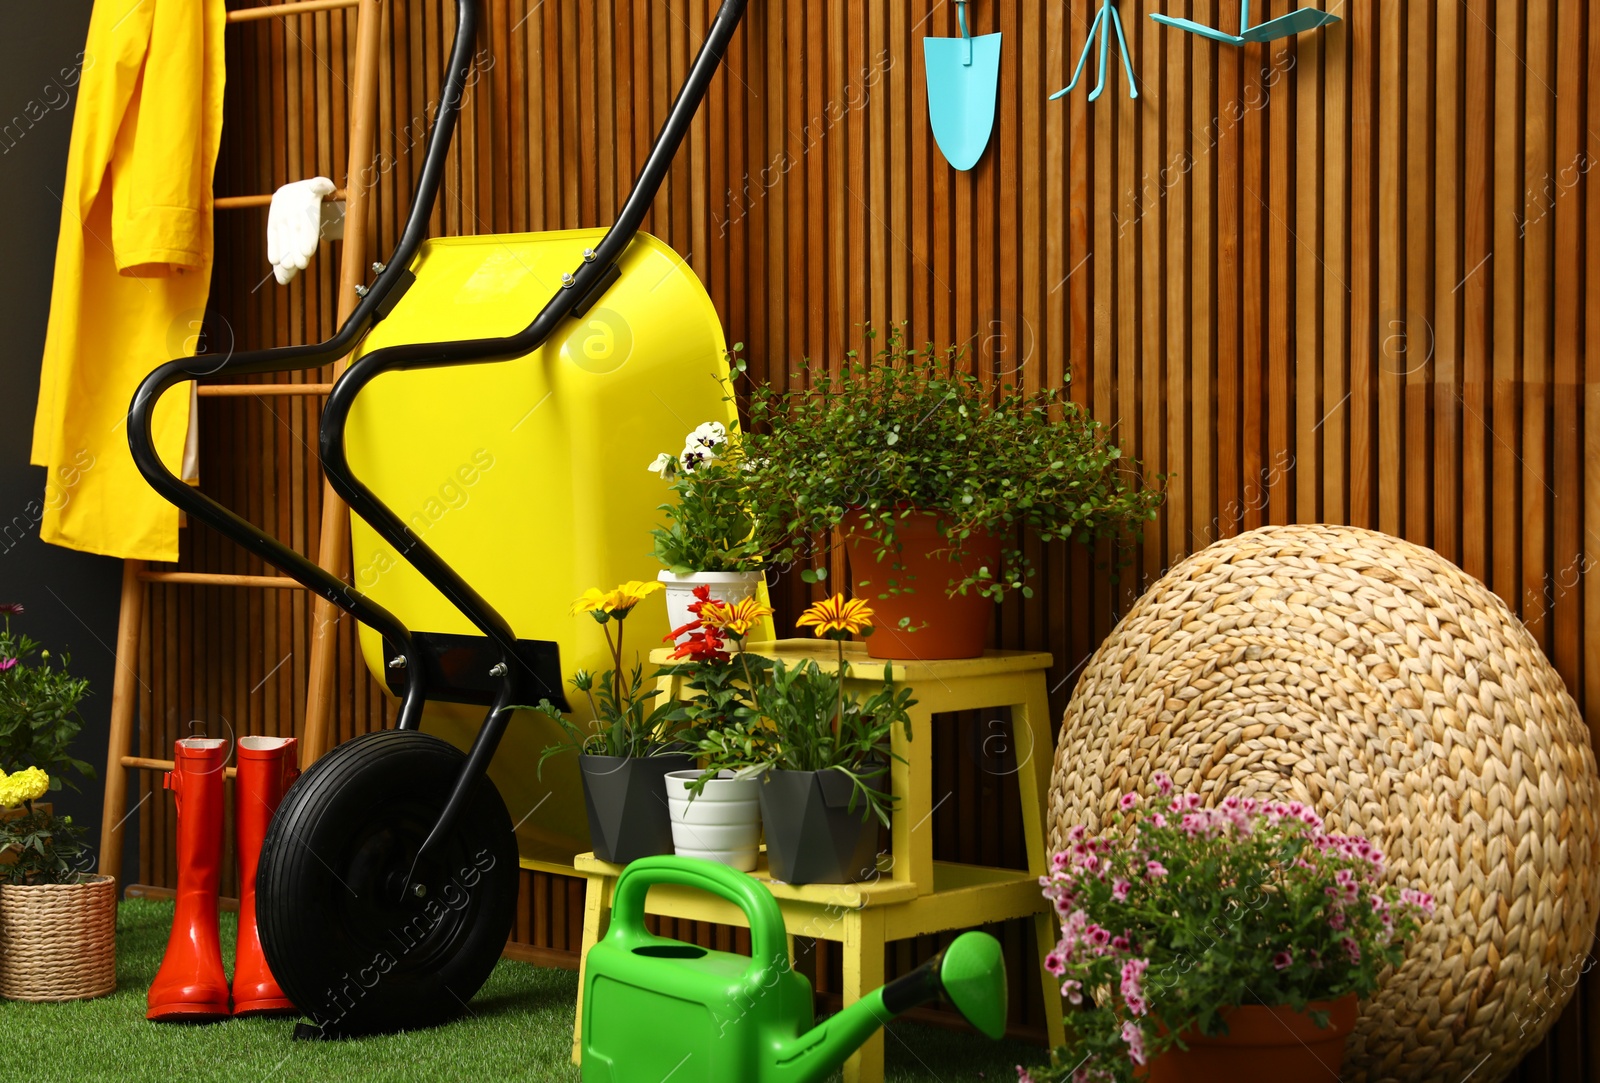 Photo of Gardening tools with wheelbarrow and flowers near wooden wall